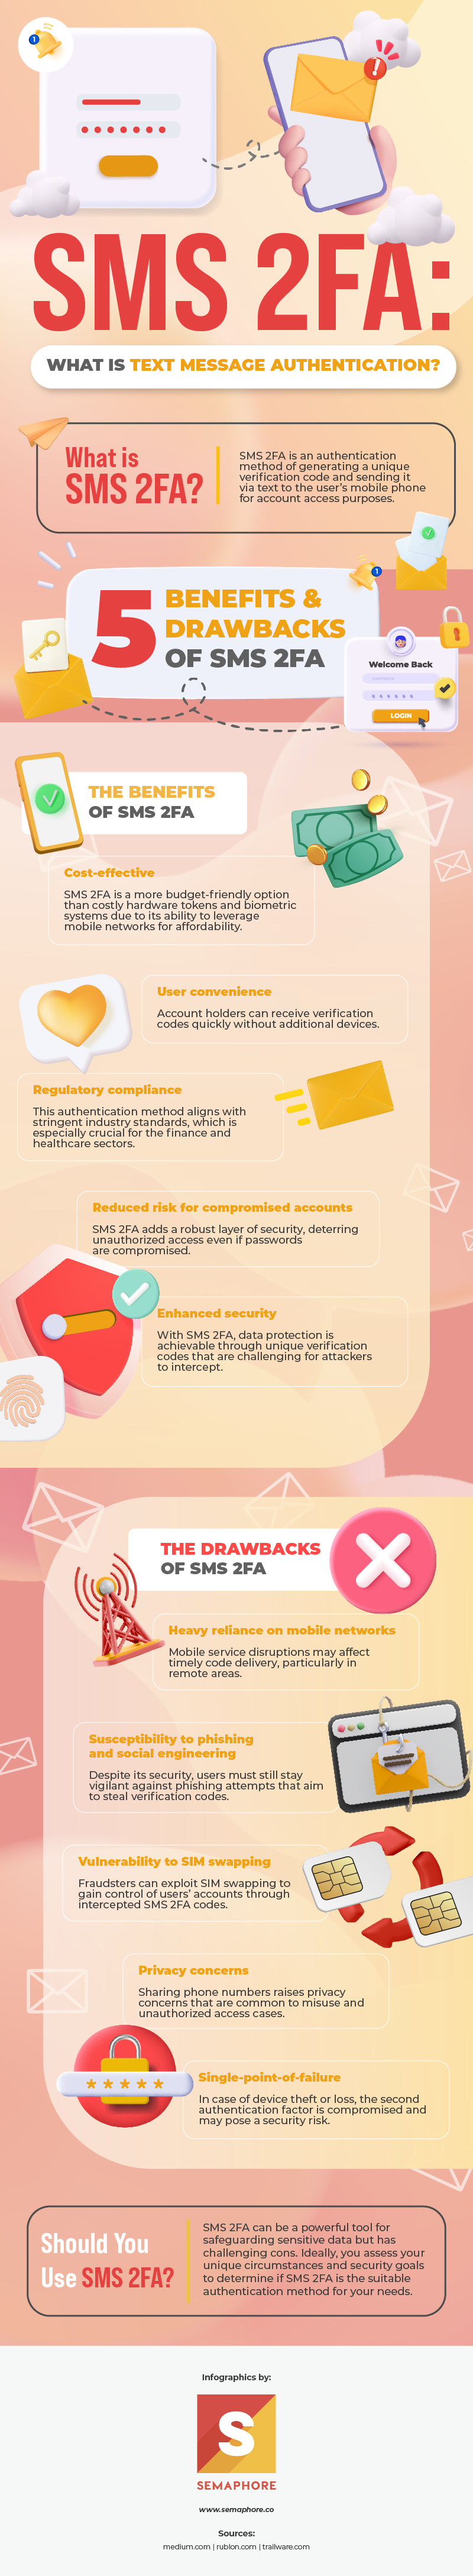 An infographic guide on SMS 2FA